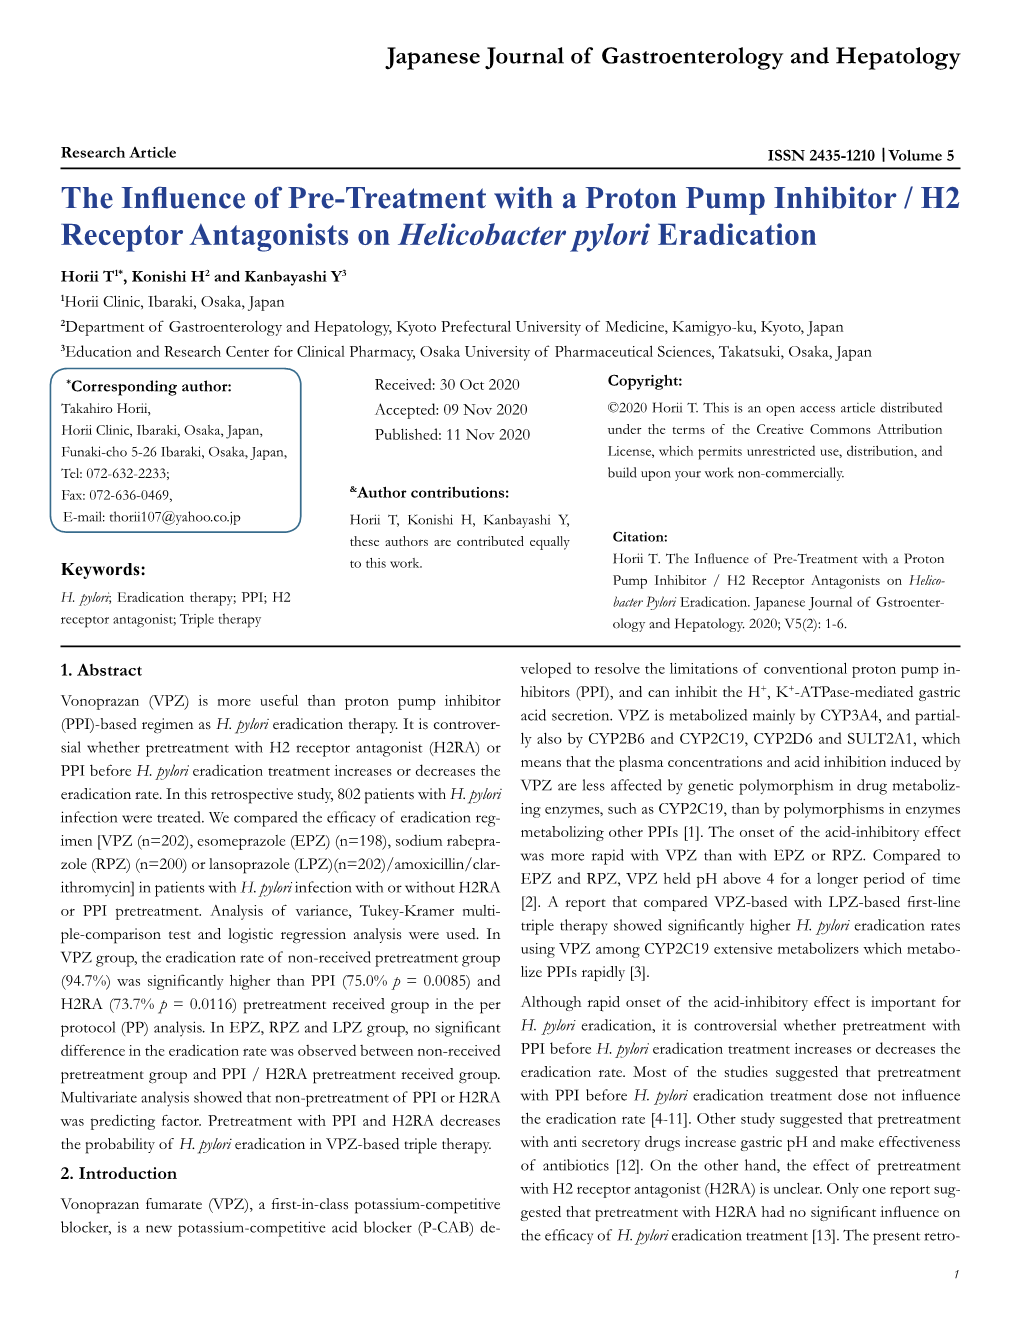 The Influence of Pre-Treatment with a Proton Pump Inhibitor / H2 Receptor Antagonists on Helicobacter Pylori Eradication